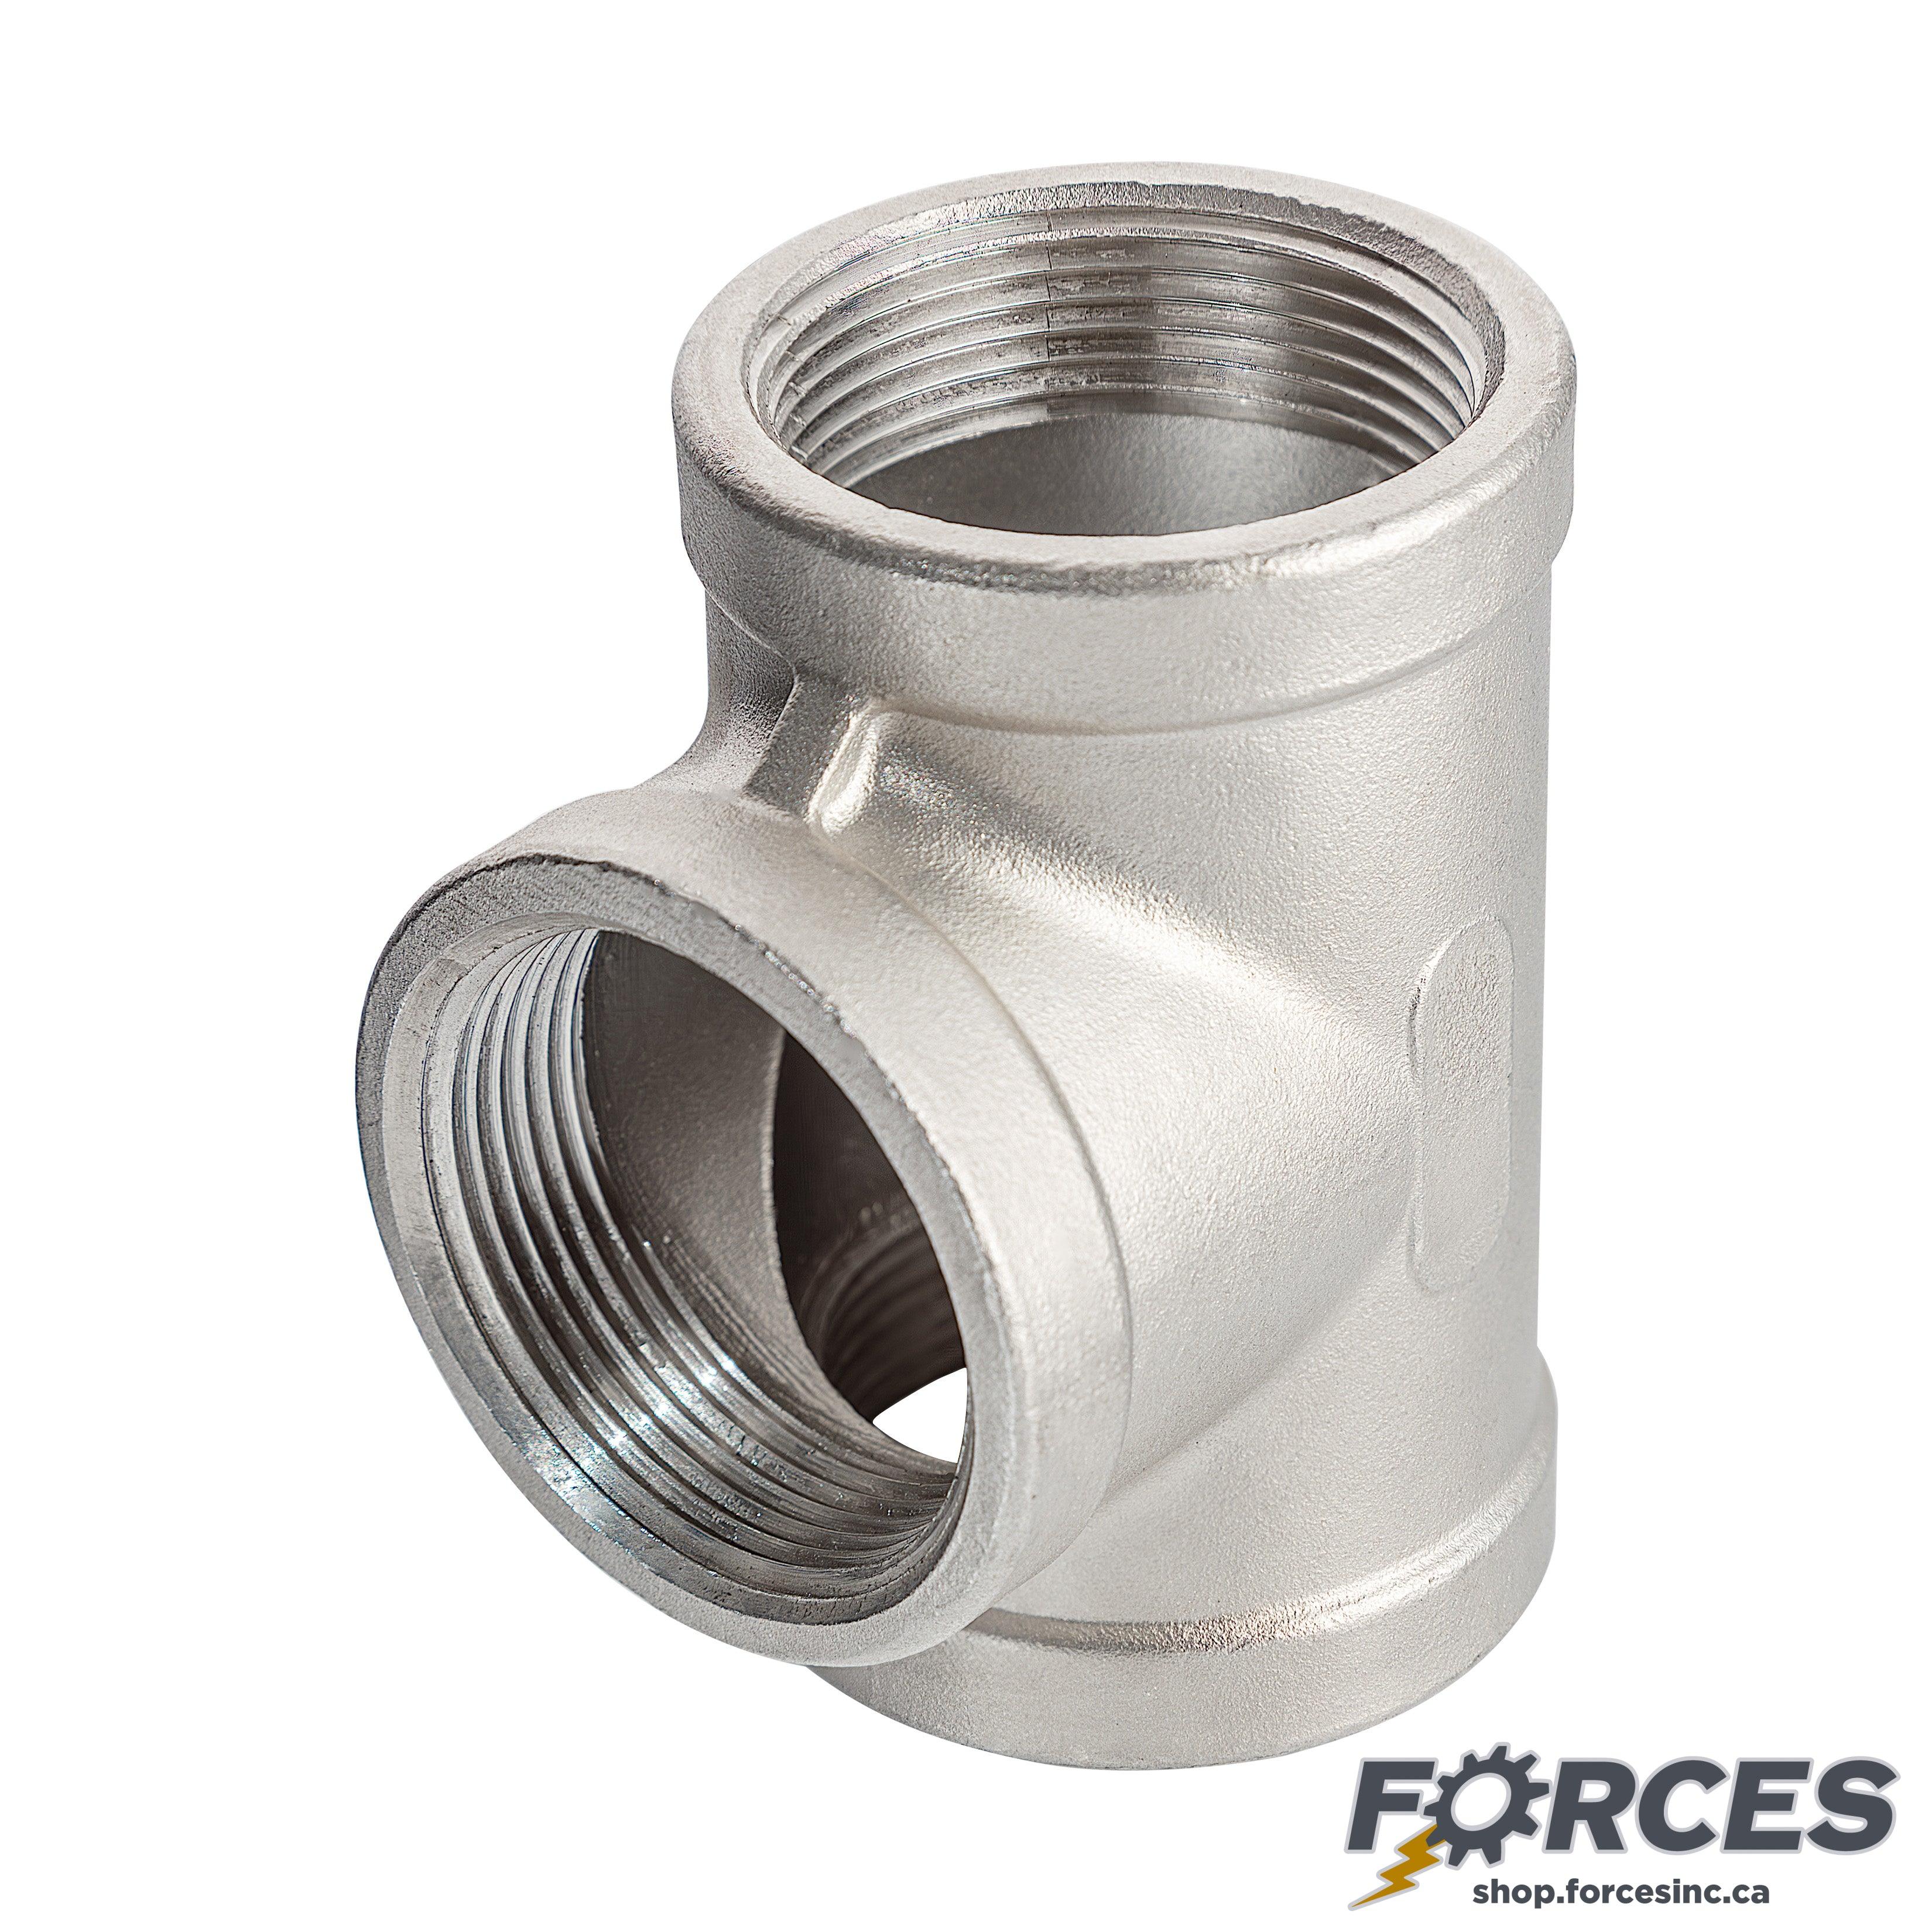 3/8" Tee NPT #150 - Stainless Steel 316 - Forces Inc